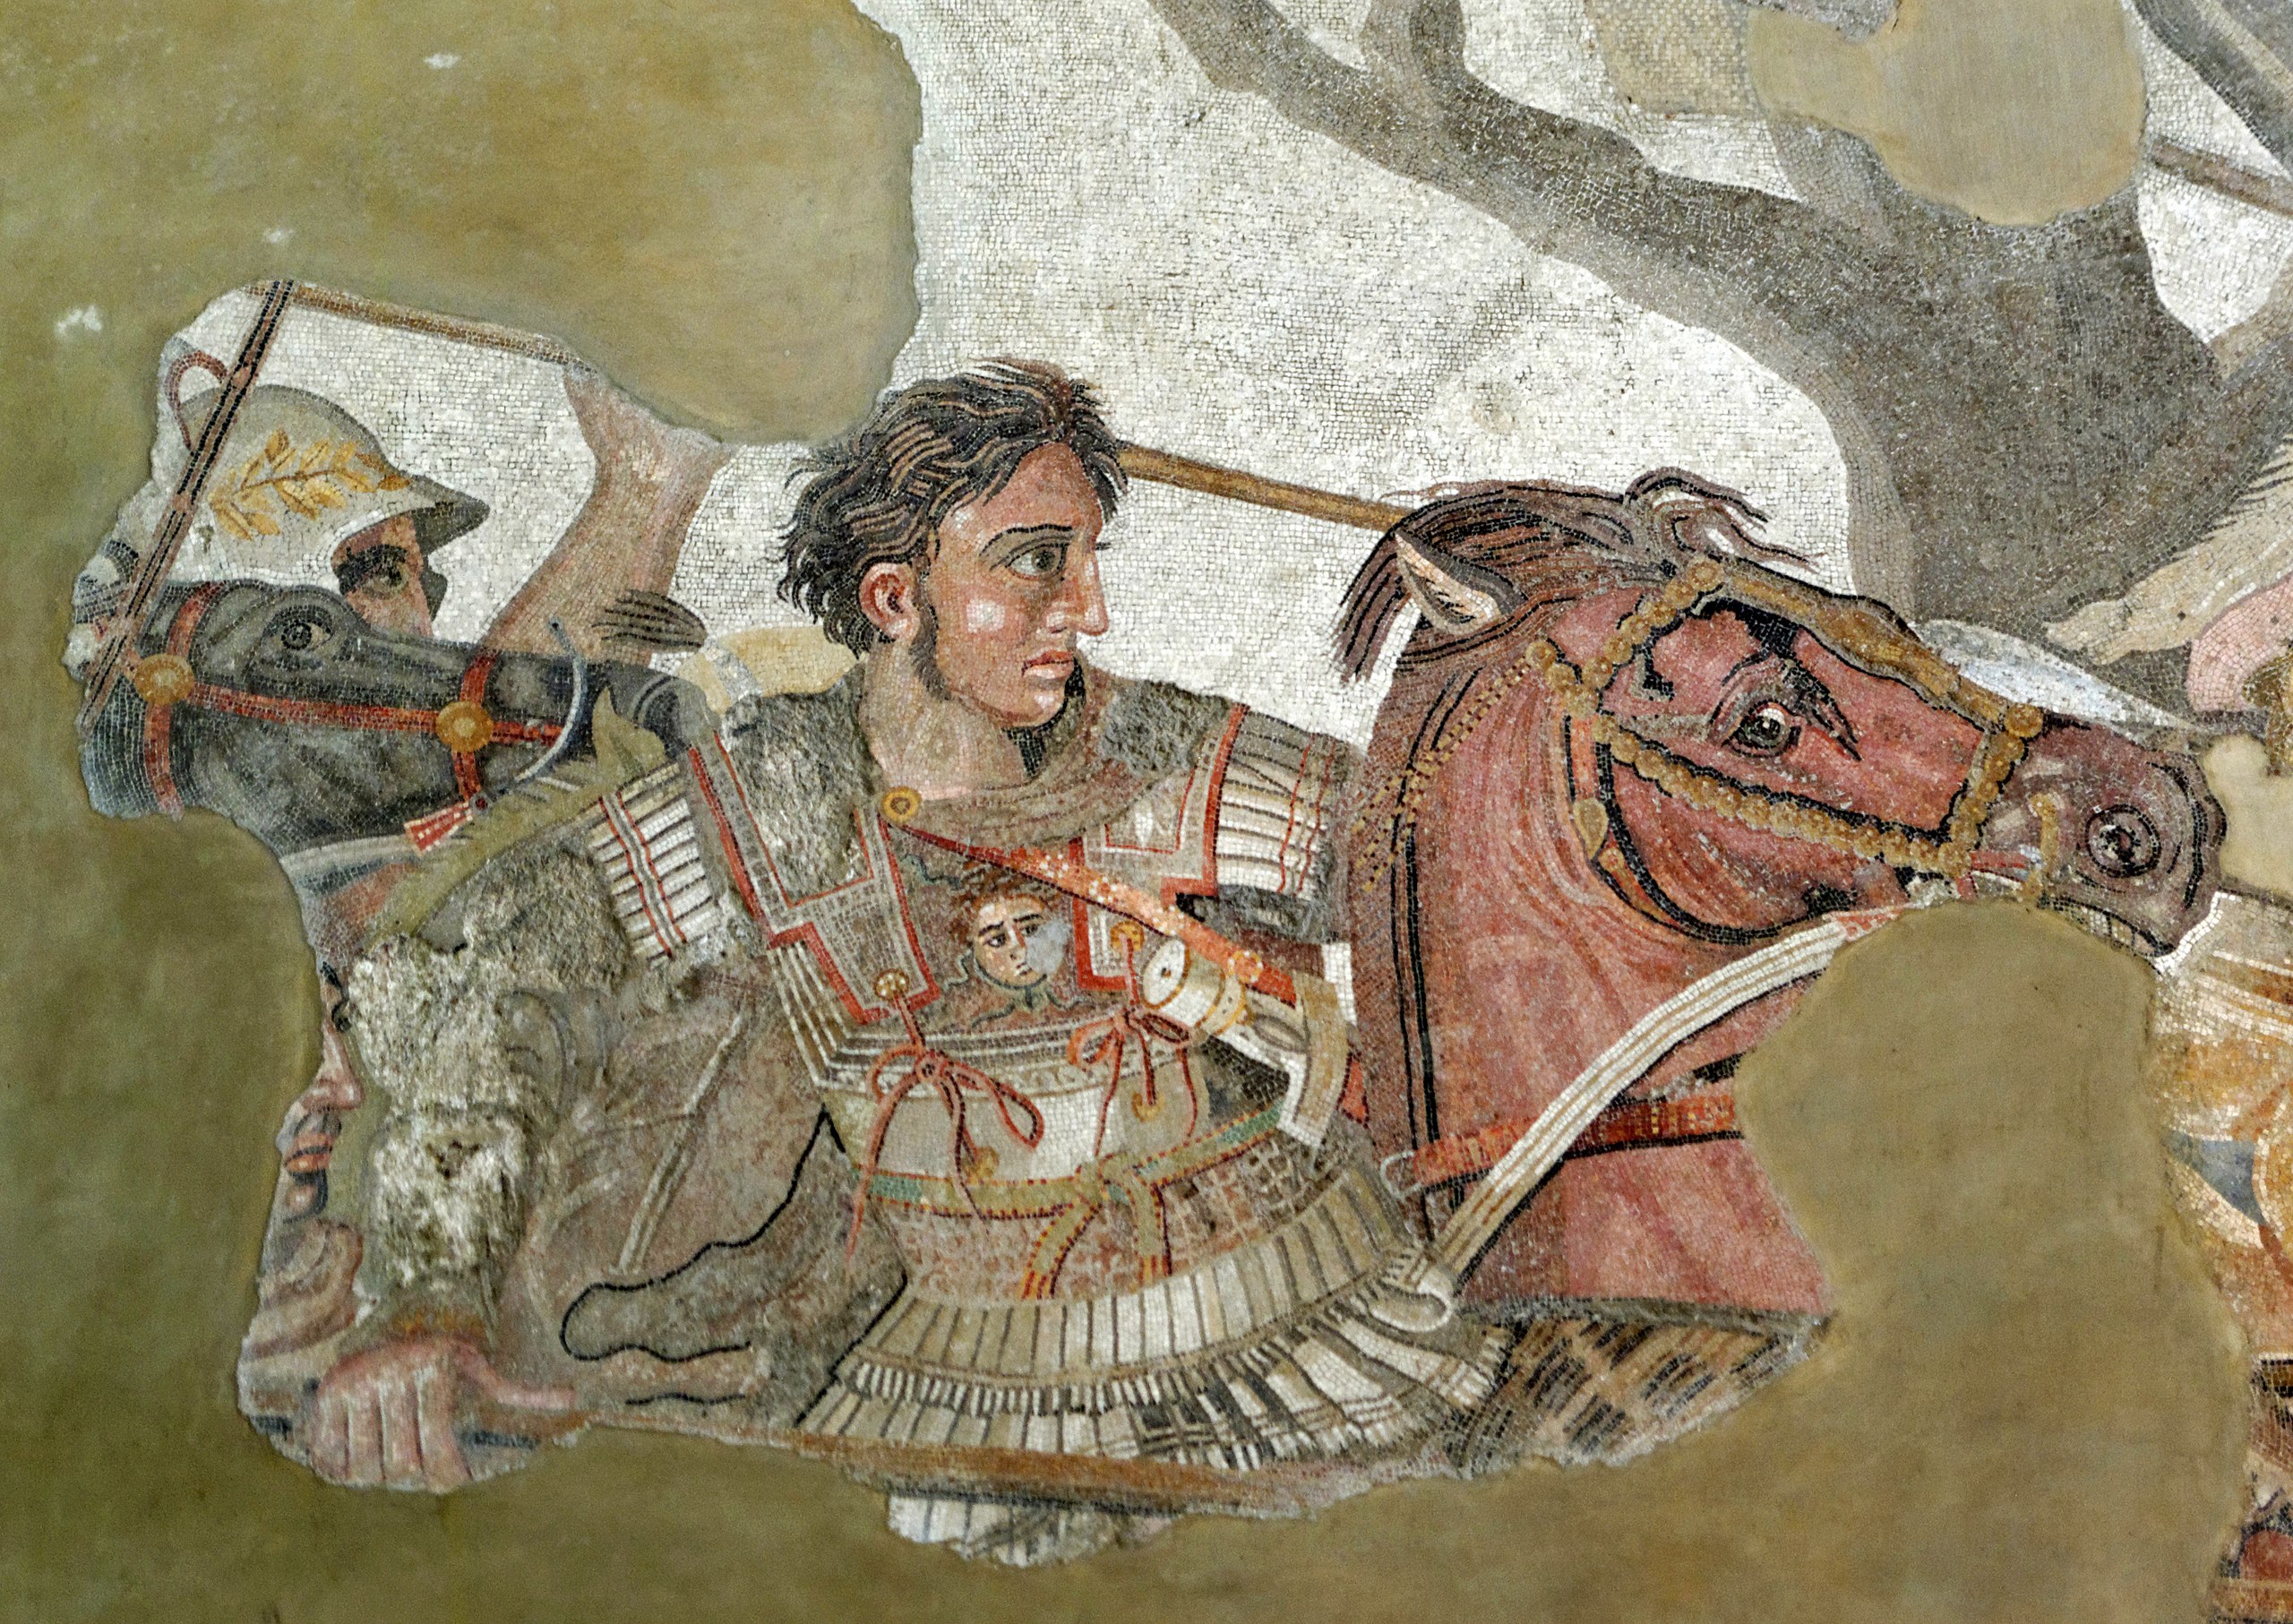 Alexander and Bucephalus in combat at the Battle of Issus portrayed in the Alexander Mosaic